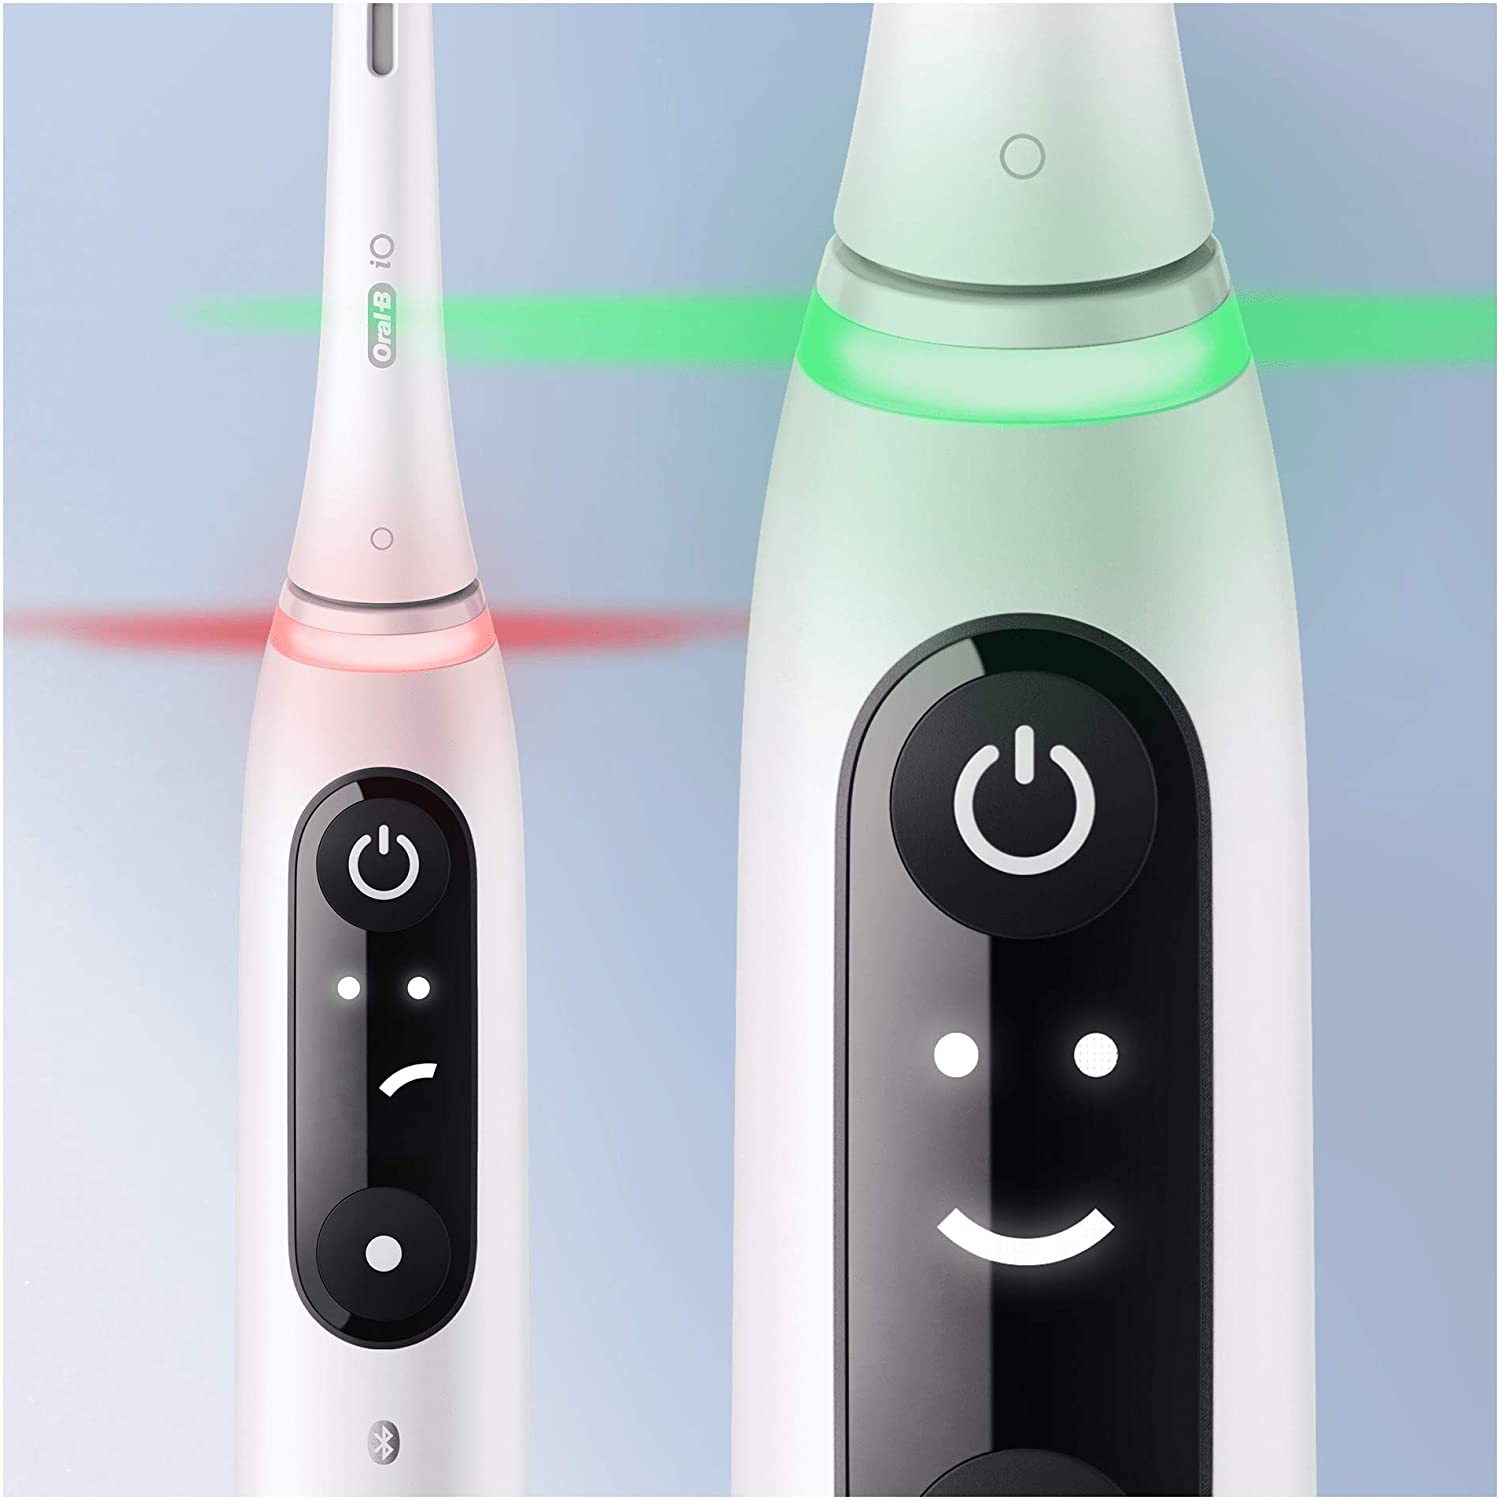 Oral-B iO 7 Twin Pack Electric Toothbrush, with Revolutionary Magnetic Technology - Healthxpress.ie